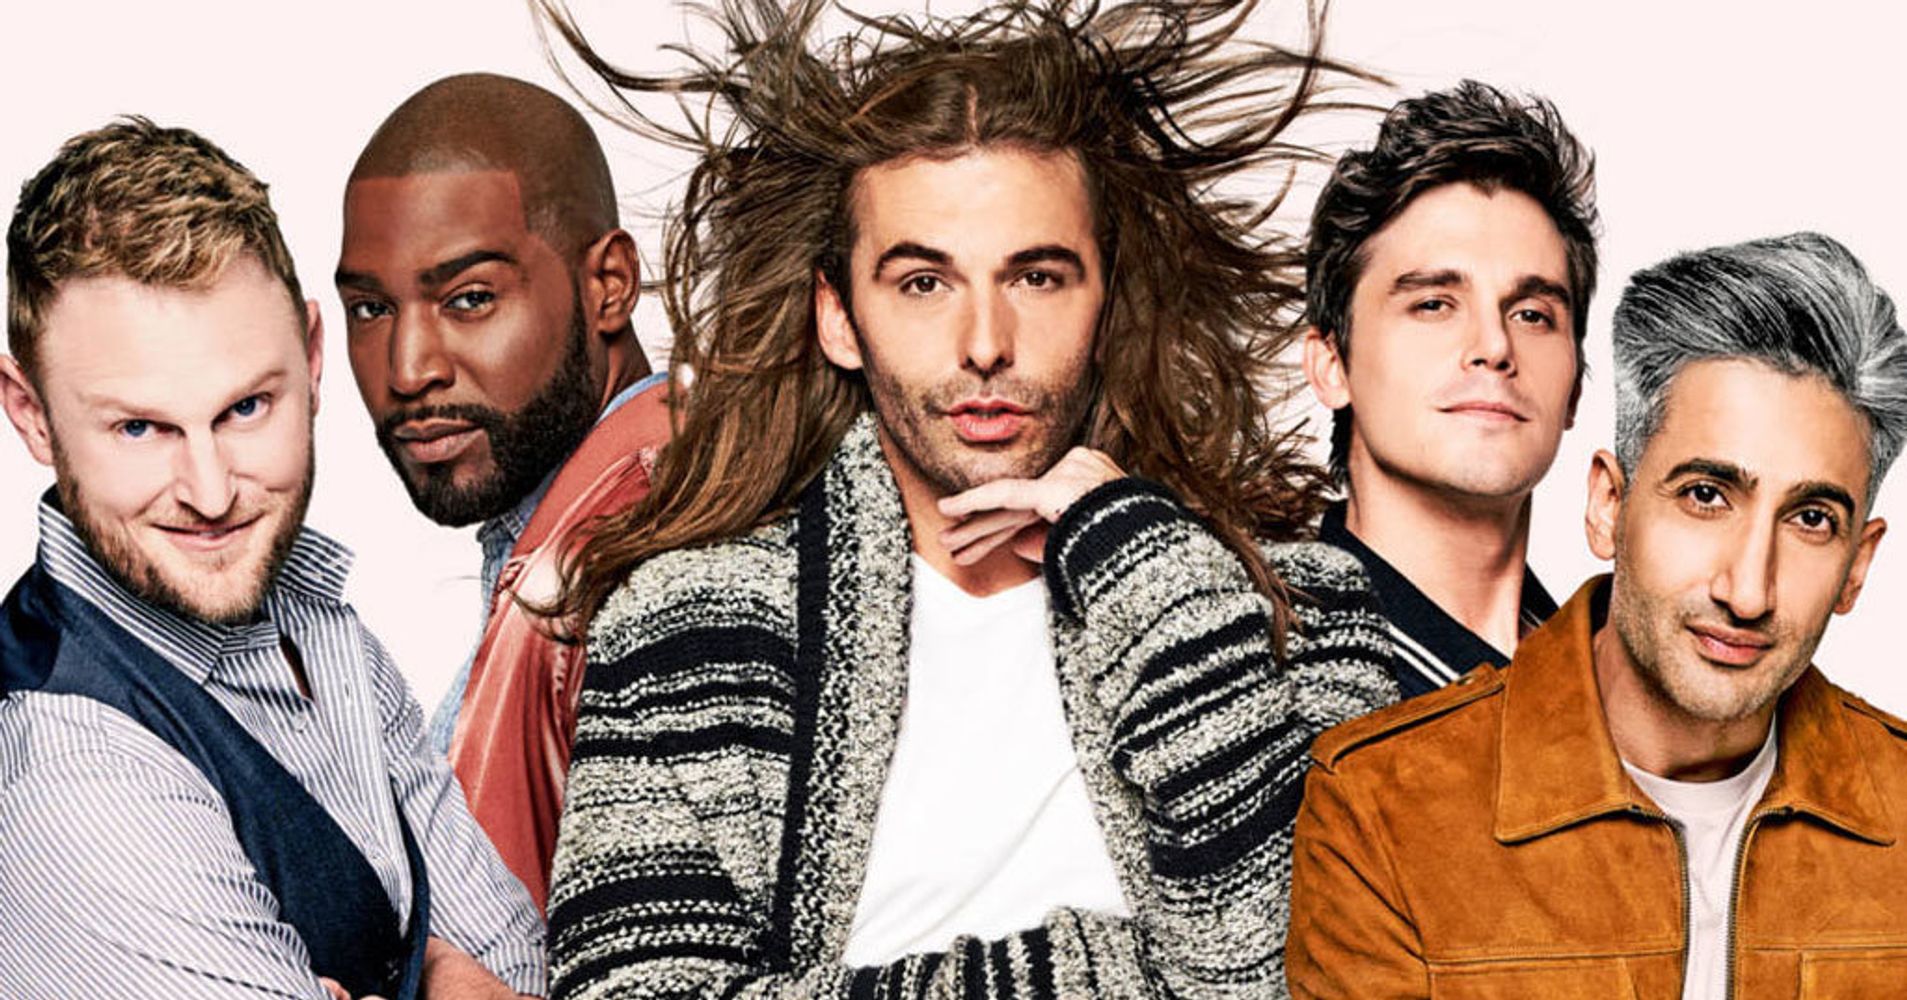 Can You Believe 'Queer Eye' Got Nominated For 4 Emmys? HuffPost